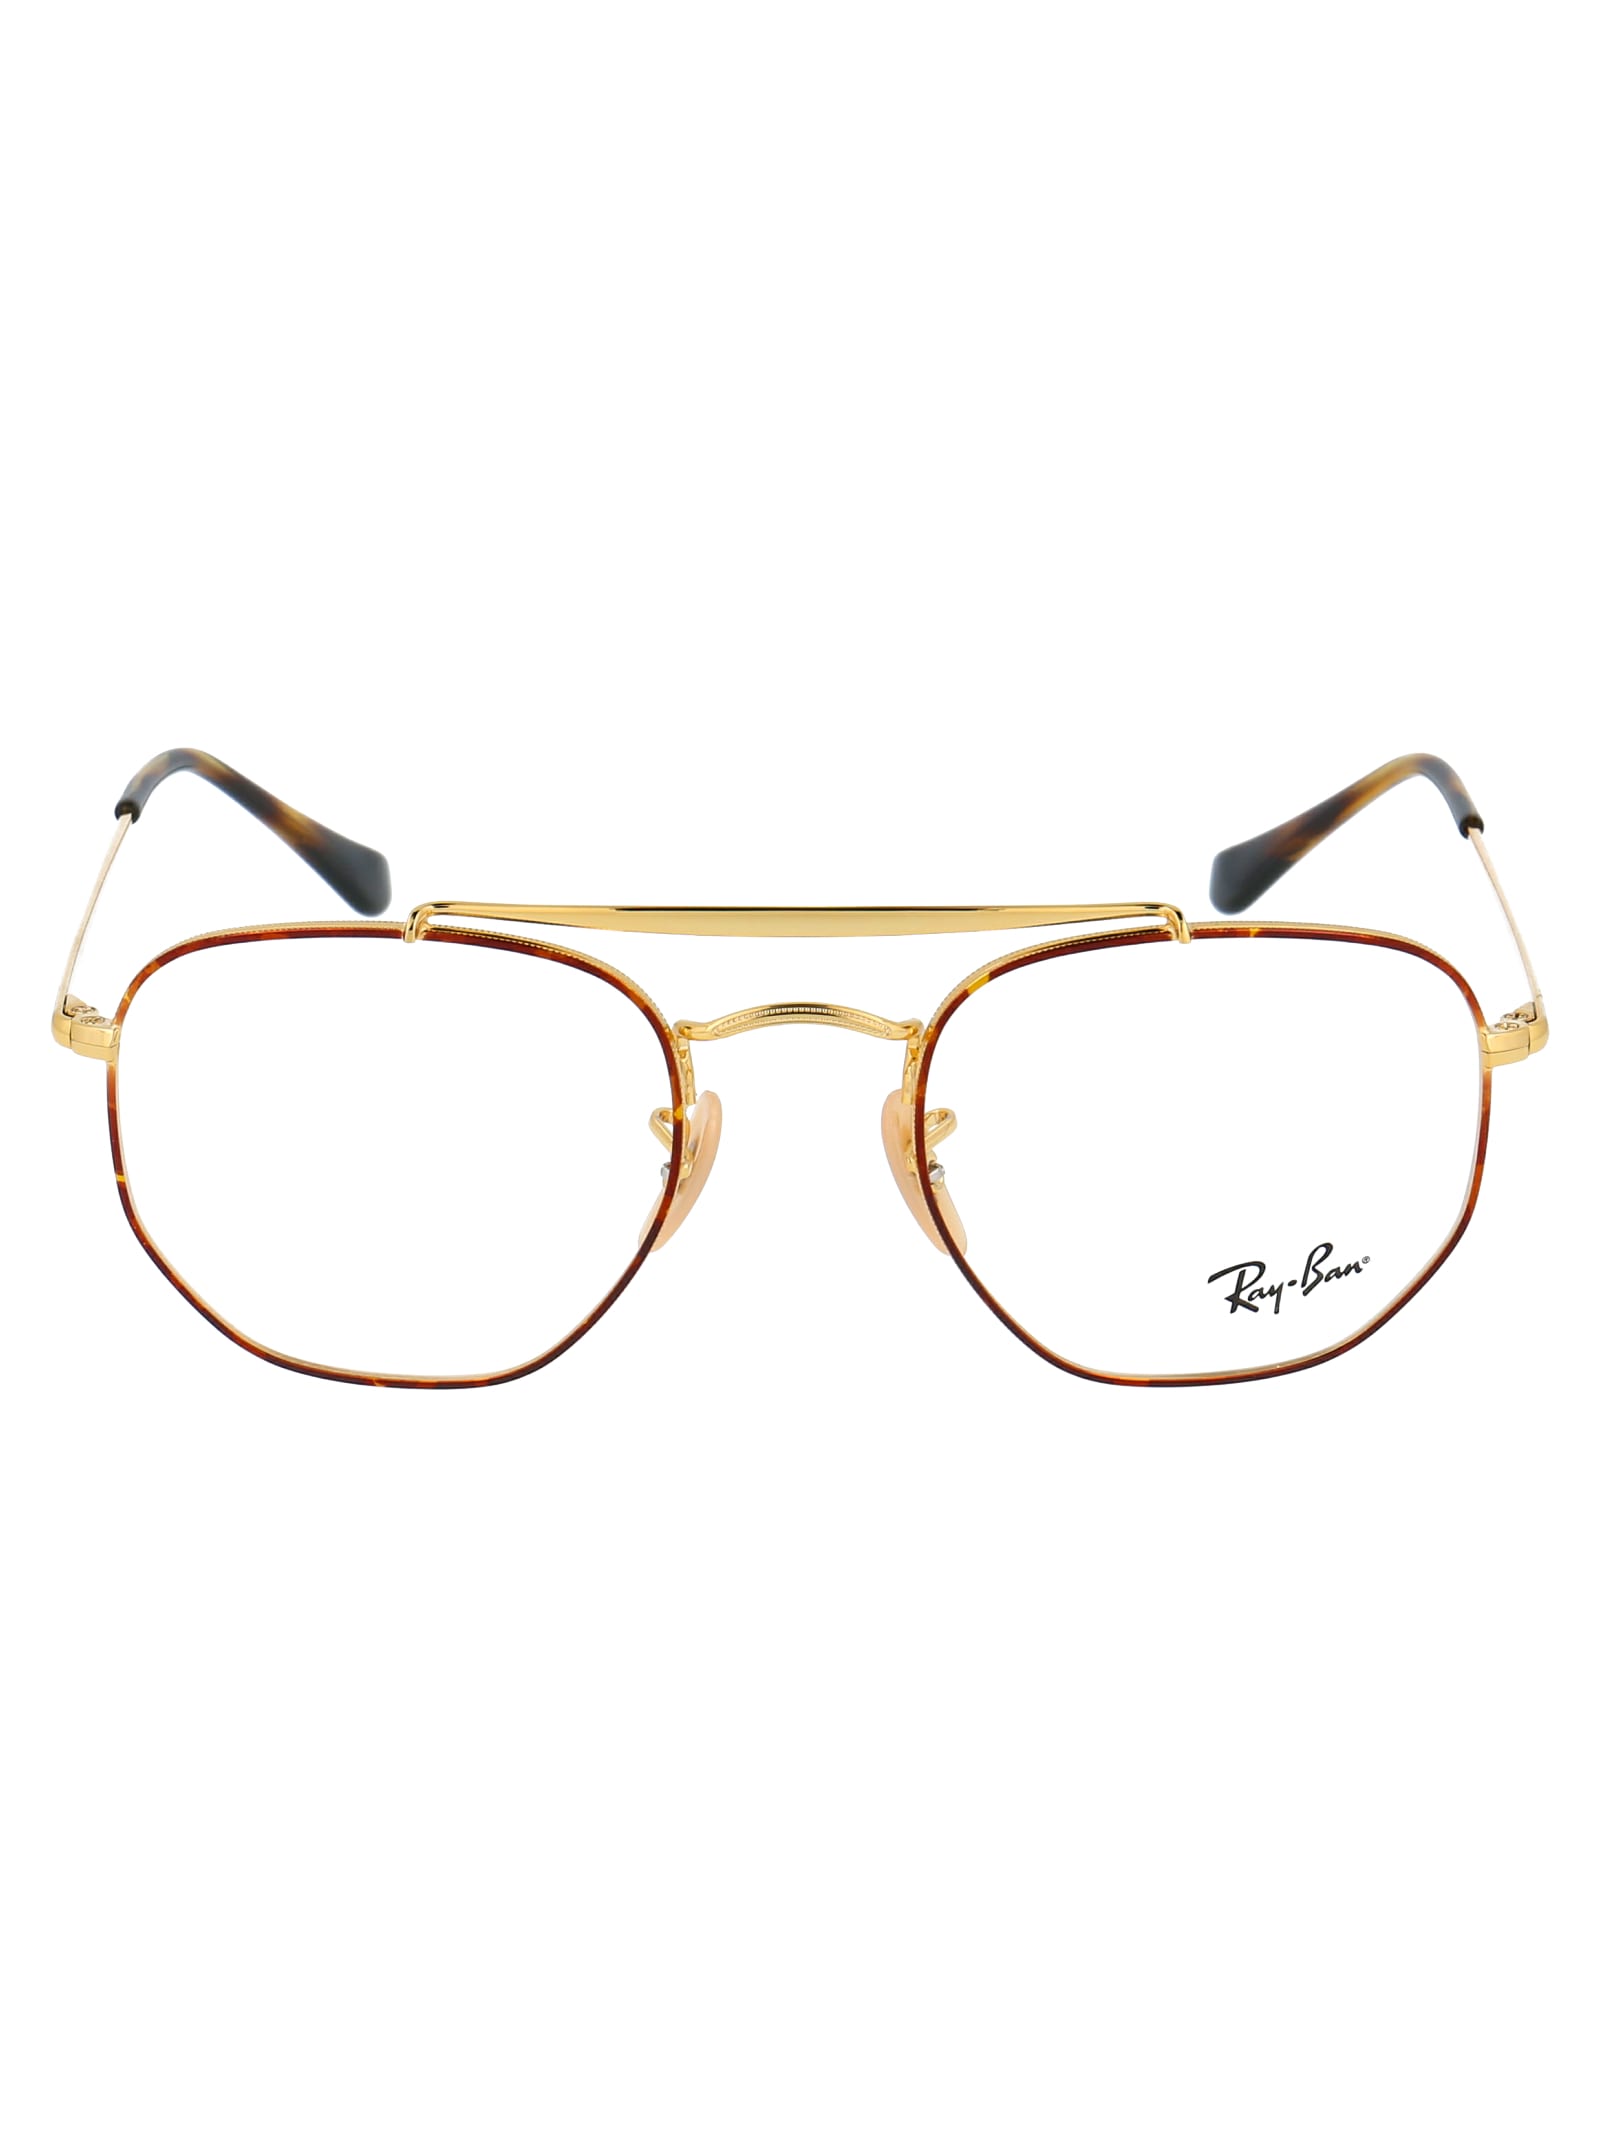 Ray Ban The Marshal Glasses In 2945 Top Havana On Gold